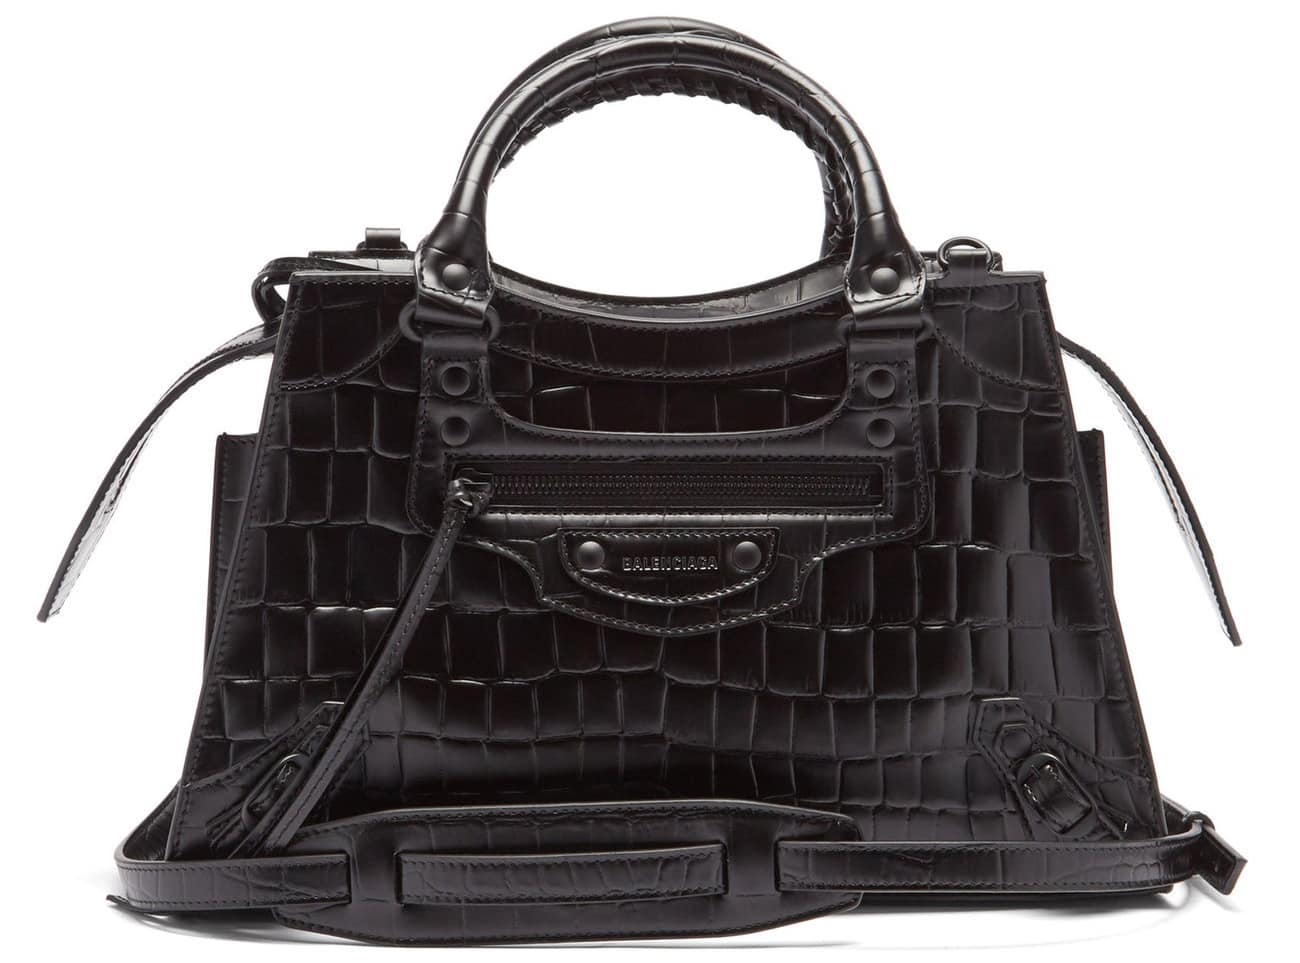 Durable and timeless, the well-loved Balenciaga black Neo Classic City bag is crafted from luxurious crocodile-effect leather